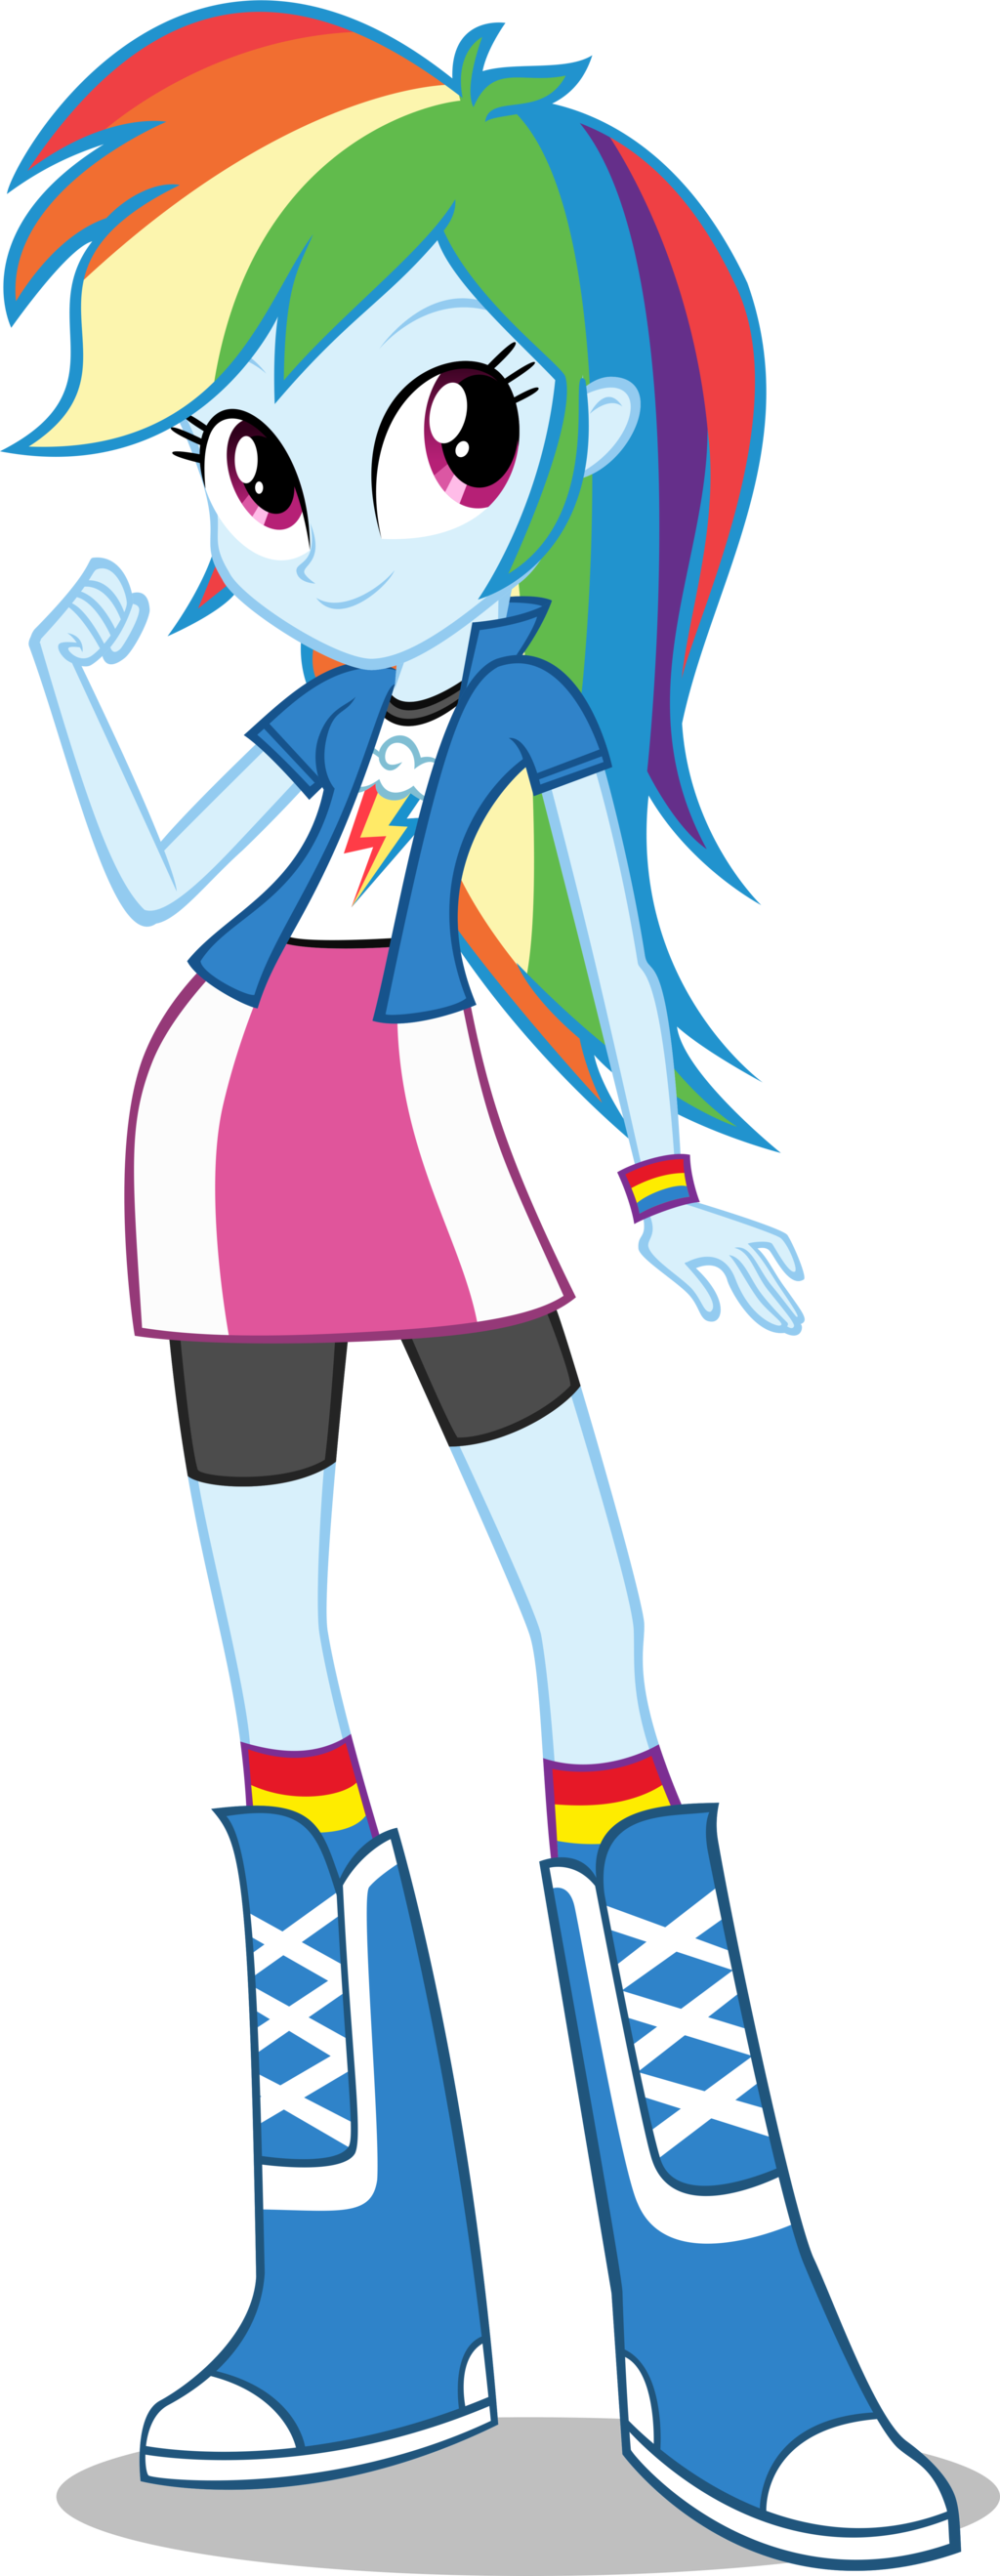 Inspiration For A Rainbow Dash Costume From The New - Equestria Girl 3 Rainbow Dash Clipart (1024x2638), Png Download